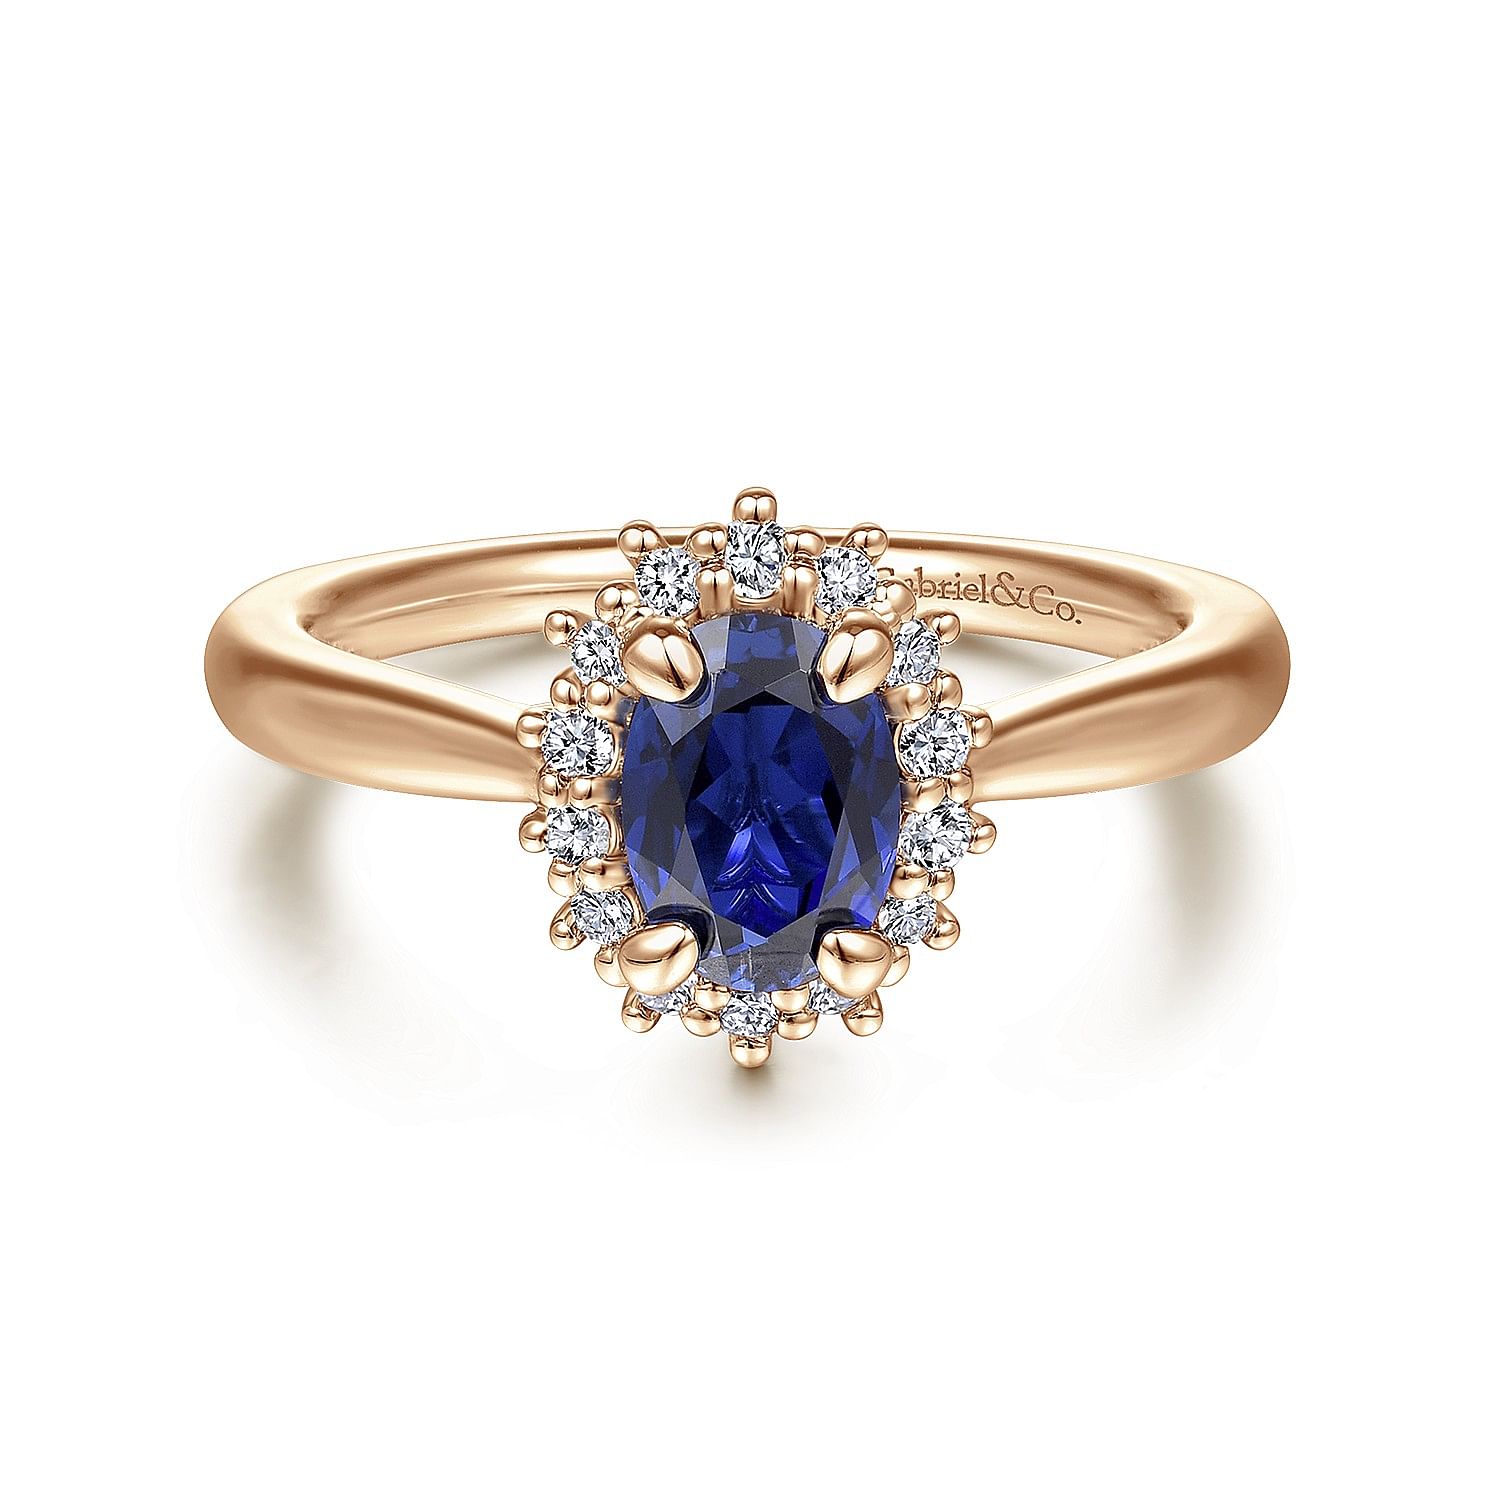 14K Rose Gold Oval Halo Diamond and Sapphire Engagement Ring